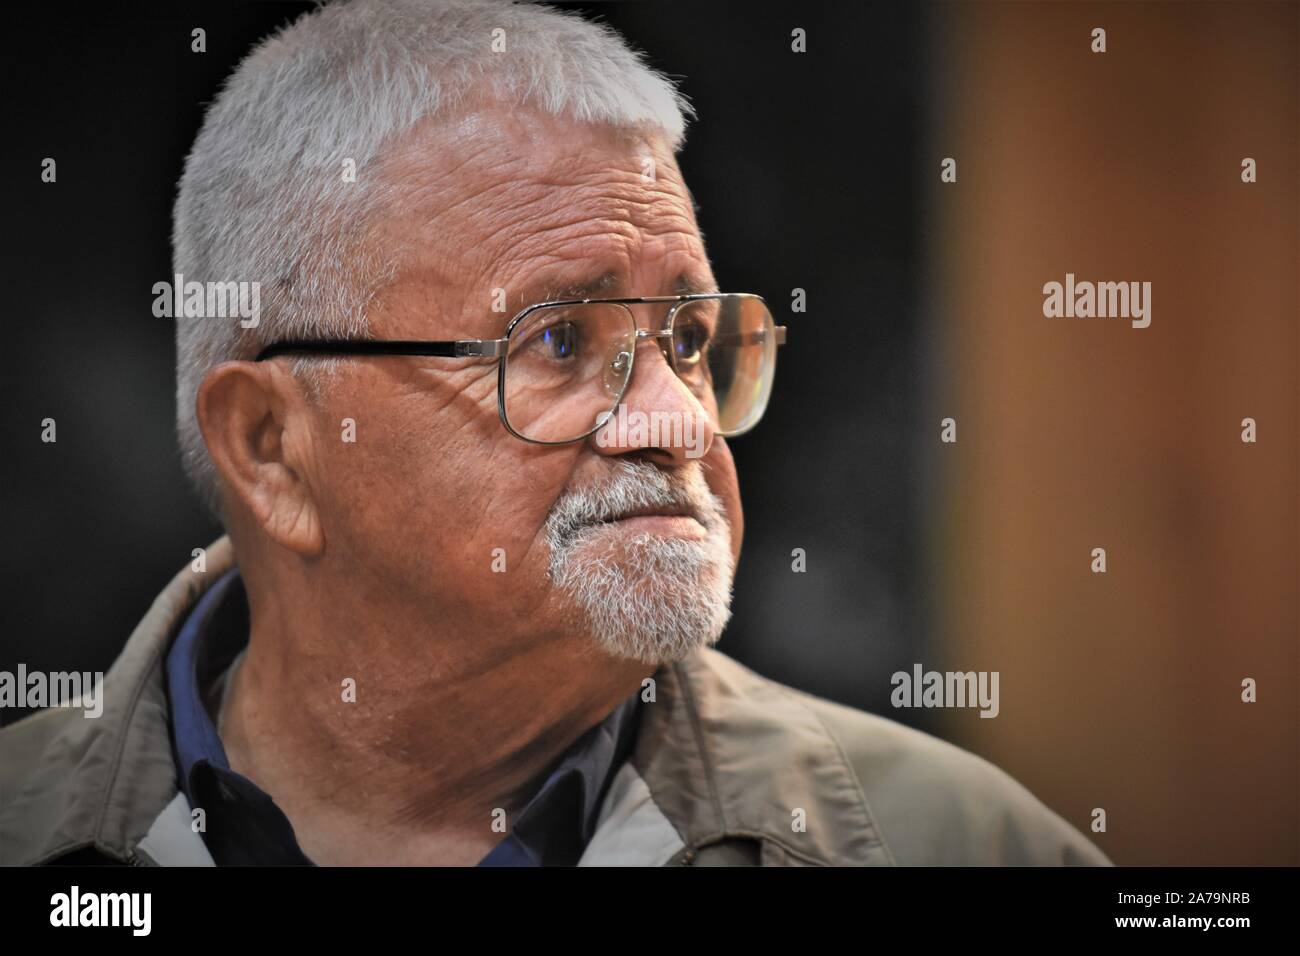 70 year old senior adult real Hispanic man with short white hair and glasses with a goatee Stock Photo